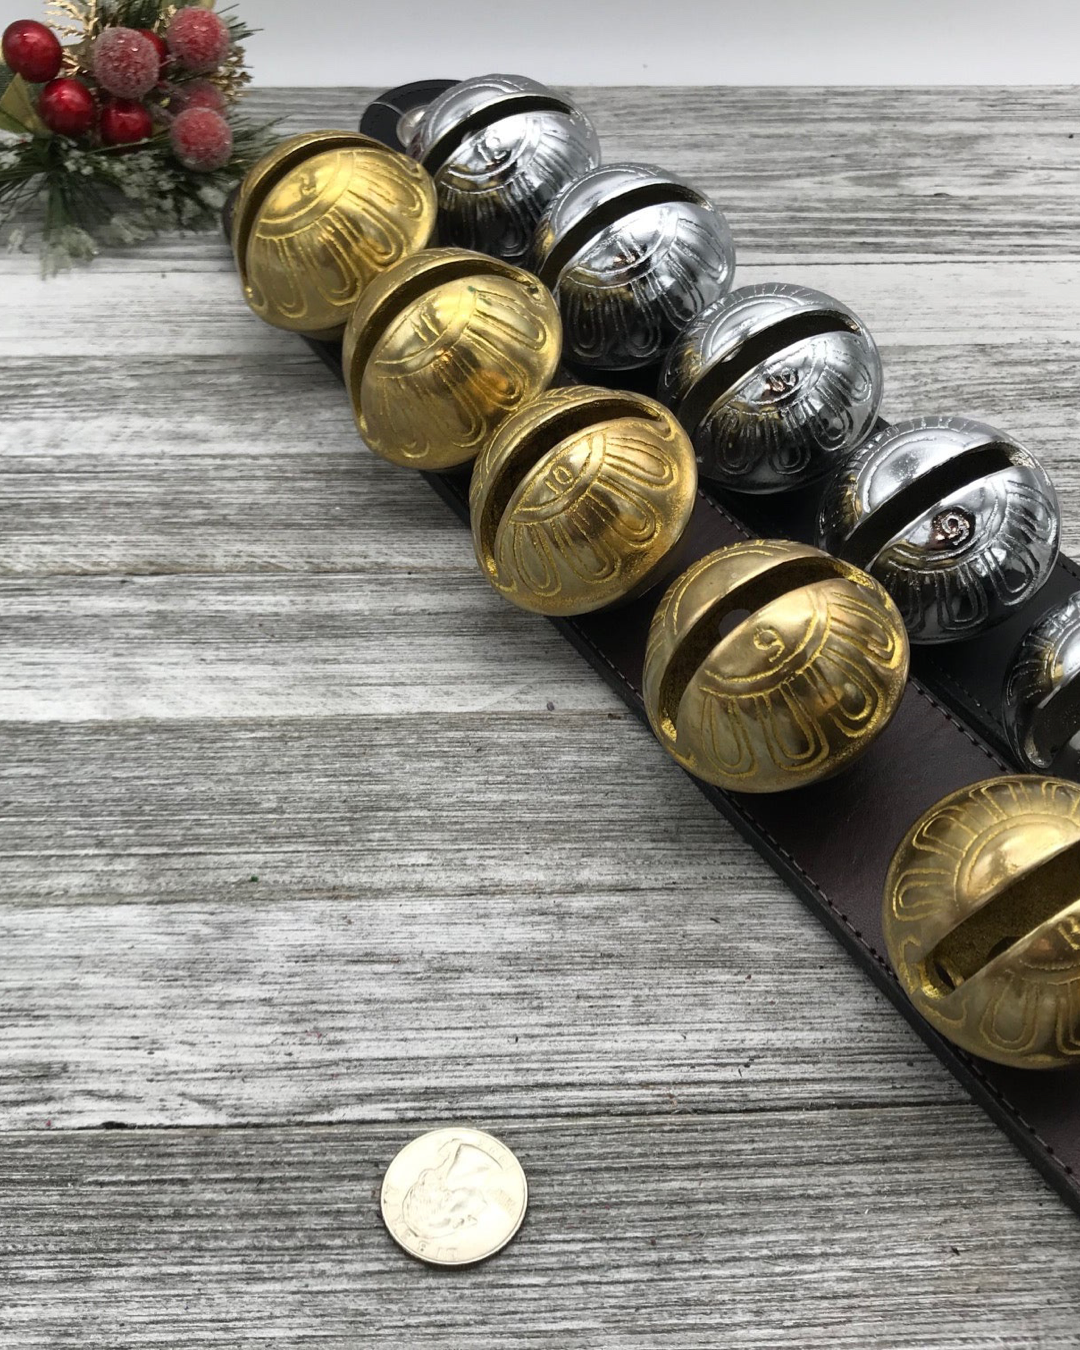 12 Authentic Solid Brass Seigh Bells, Handmade Leather Sleigh Bells Set, Handmade  in USA.